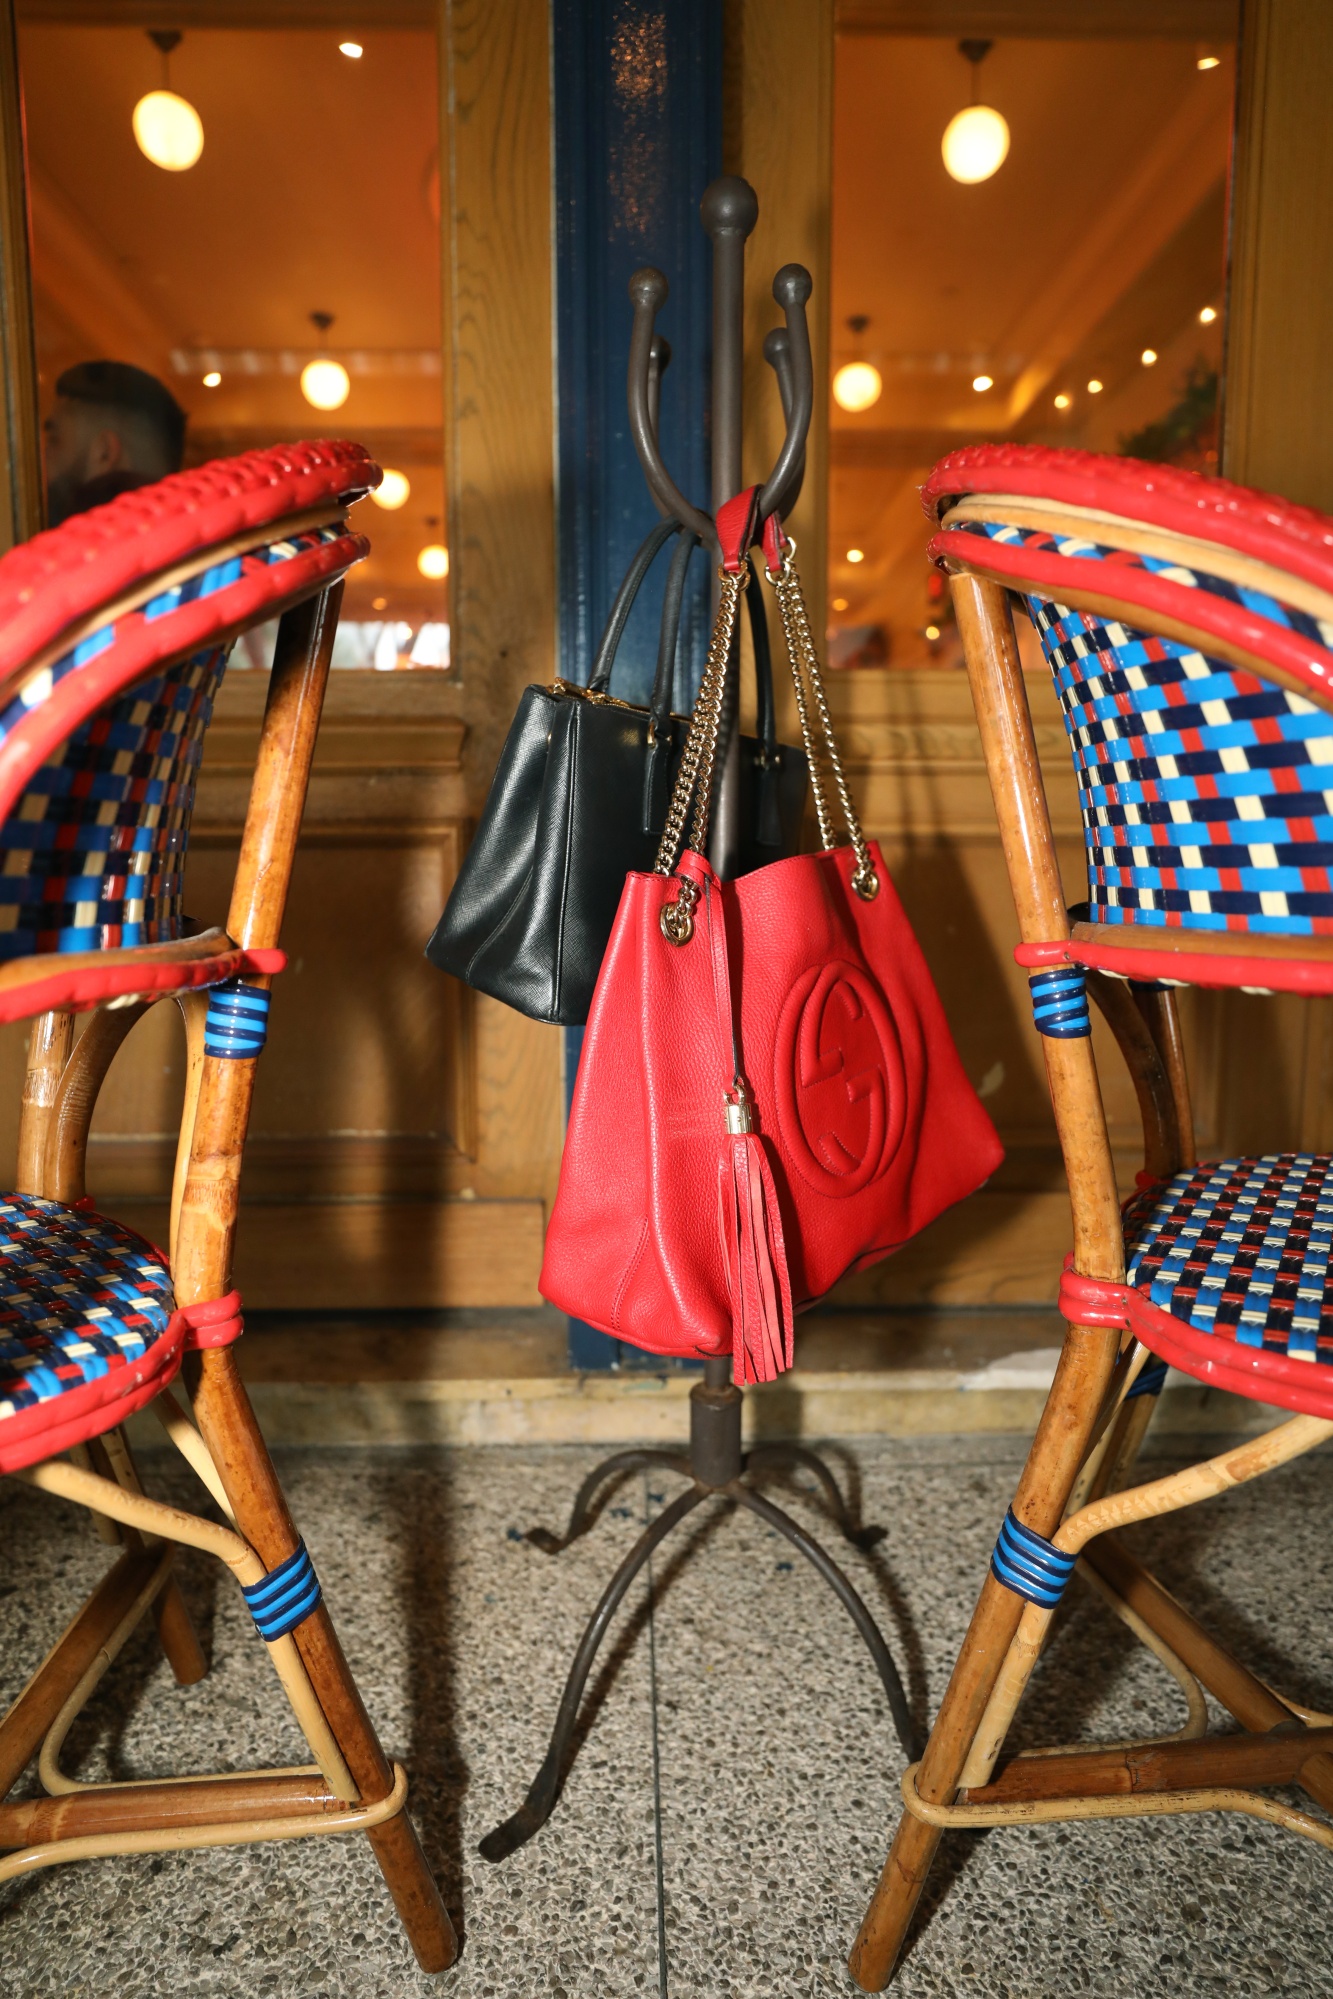 Restaurants Are Installing Stools and Baskets to Hold Luxury Handbags –  Robb Report